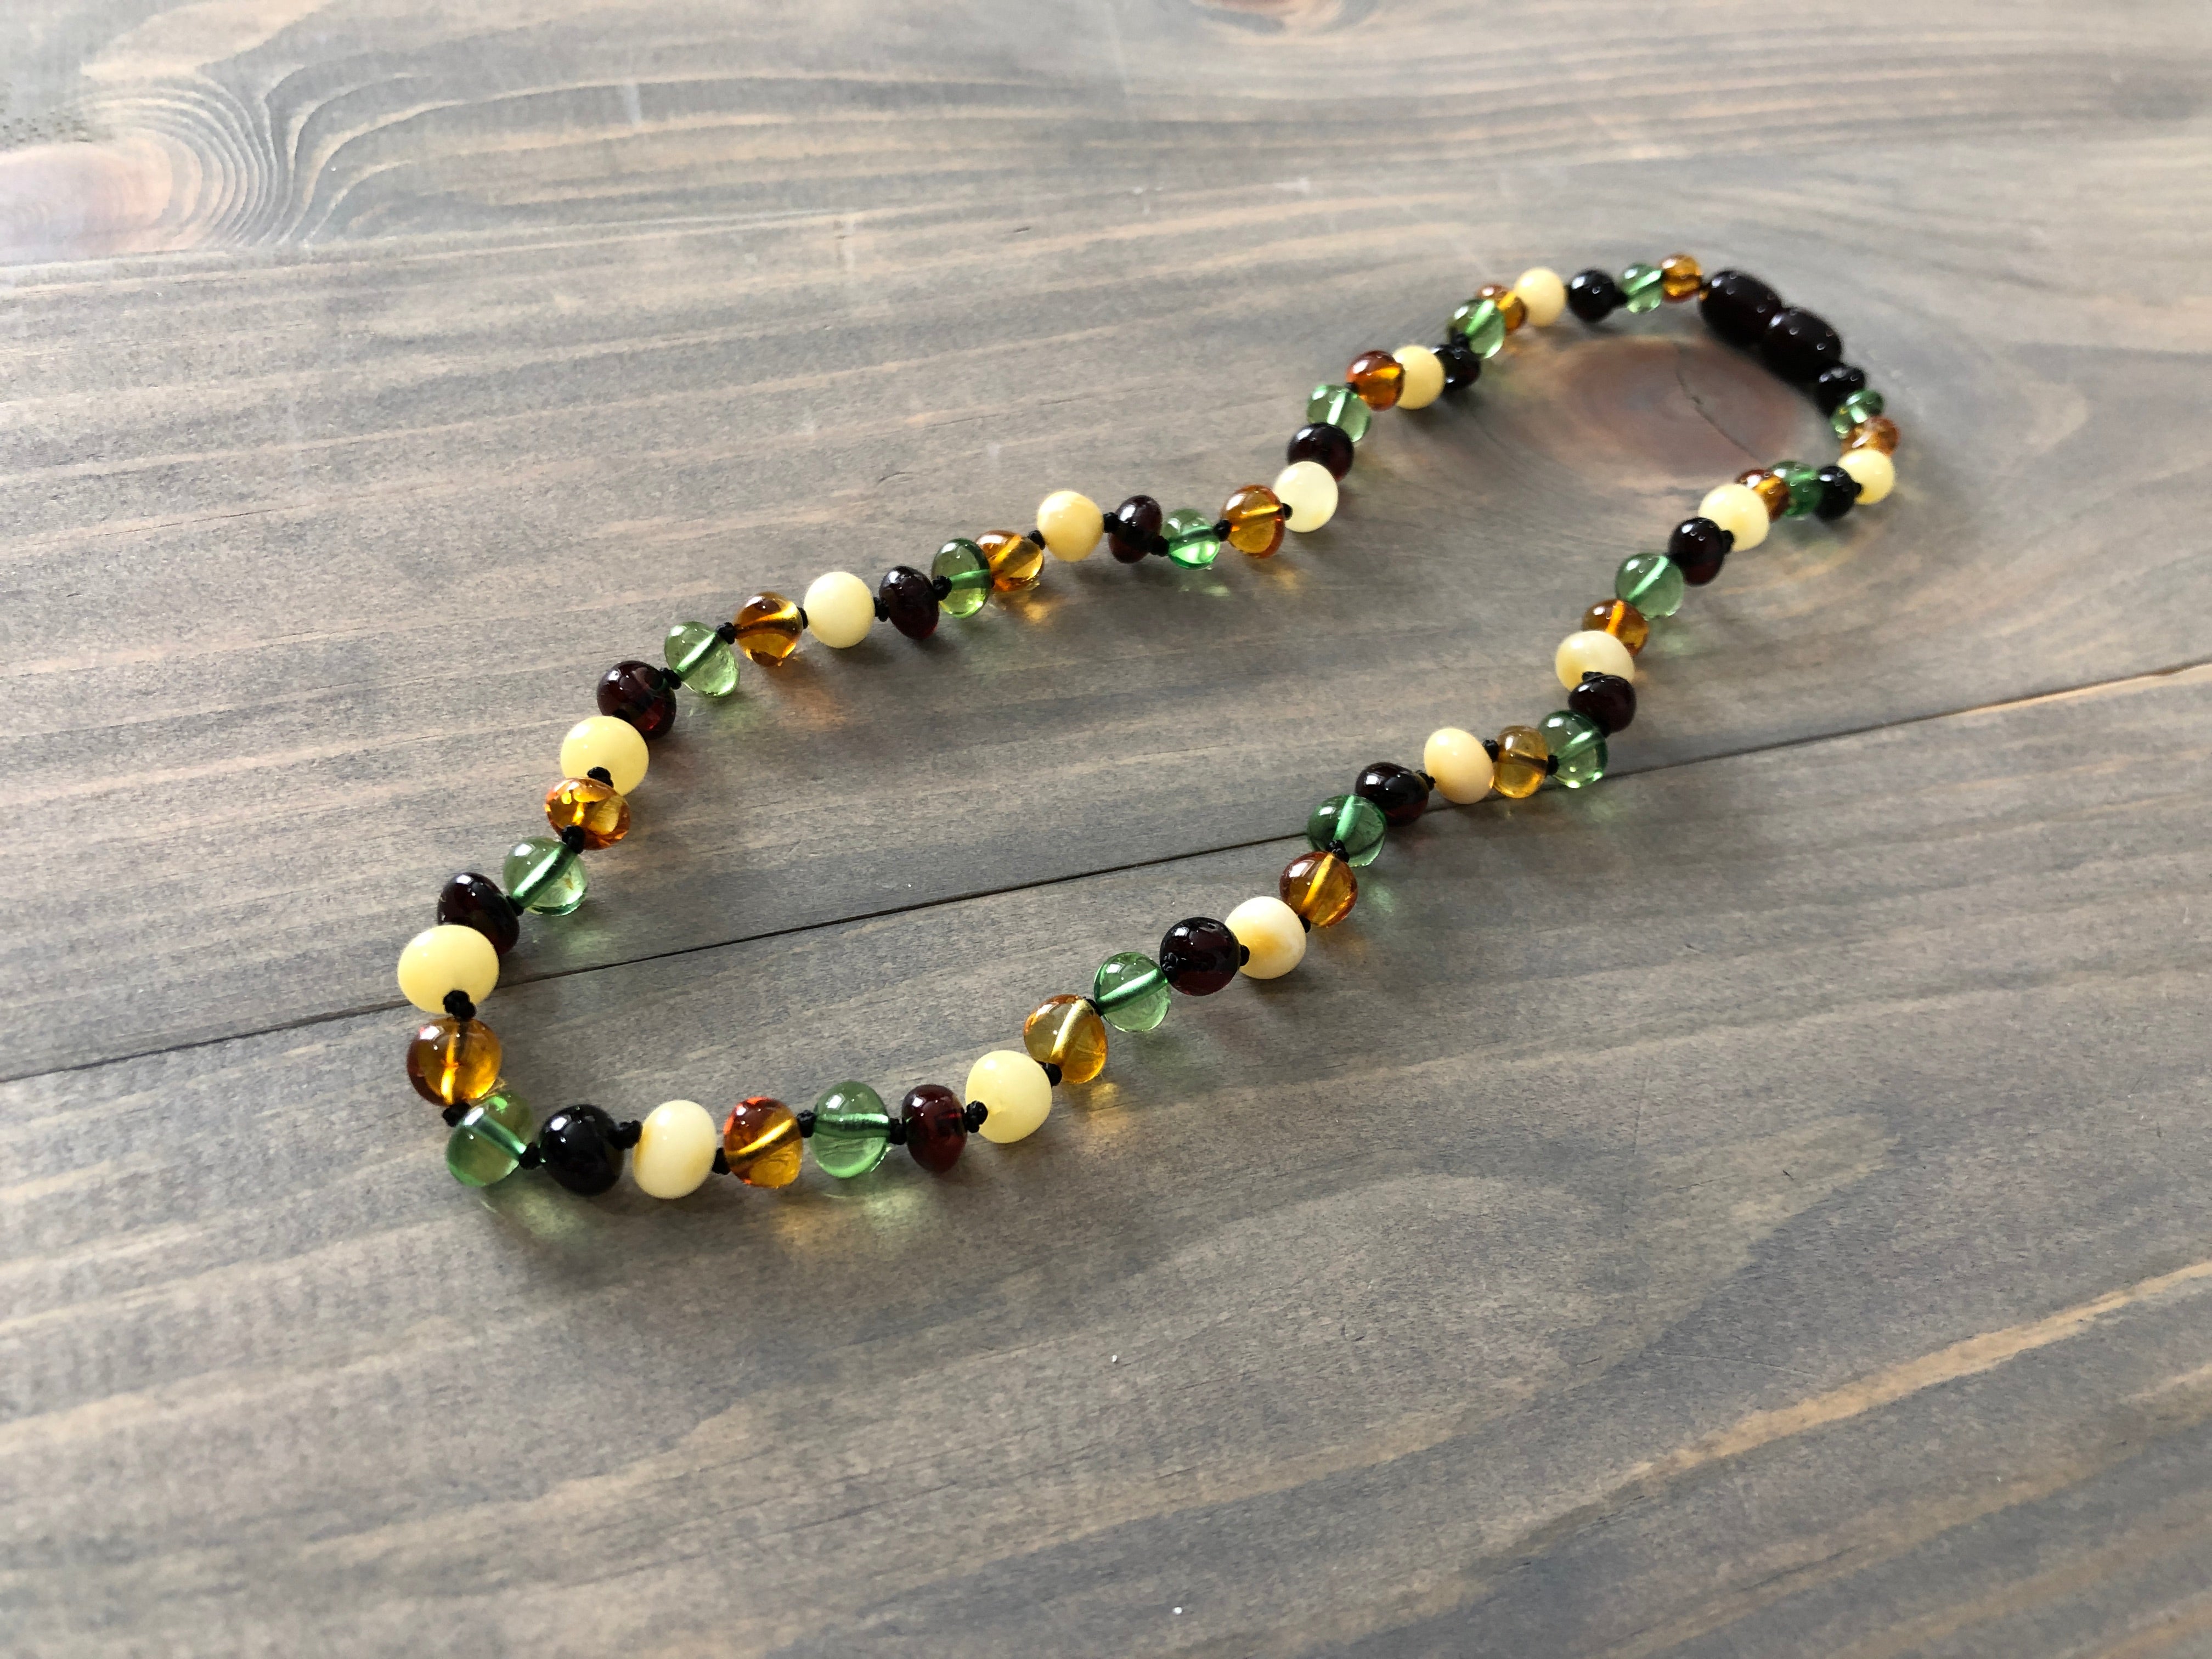 Polished Caribbean Baltic Amber Necklace Newborn 11 12.5 inch